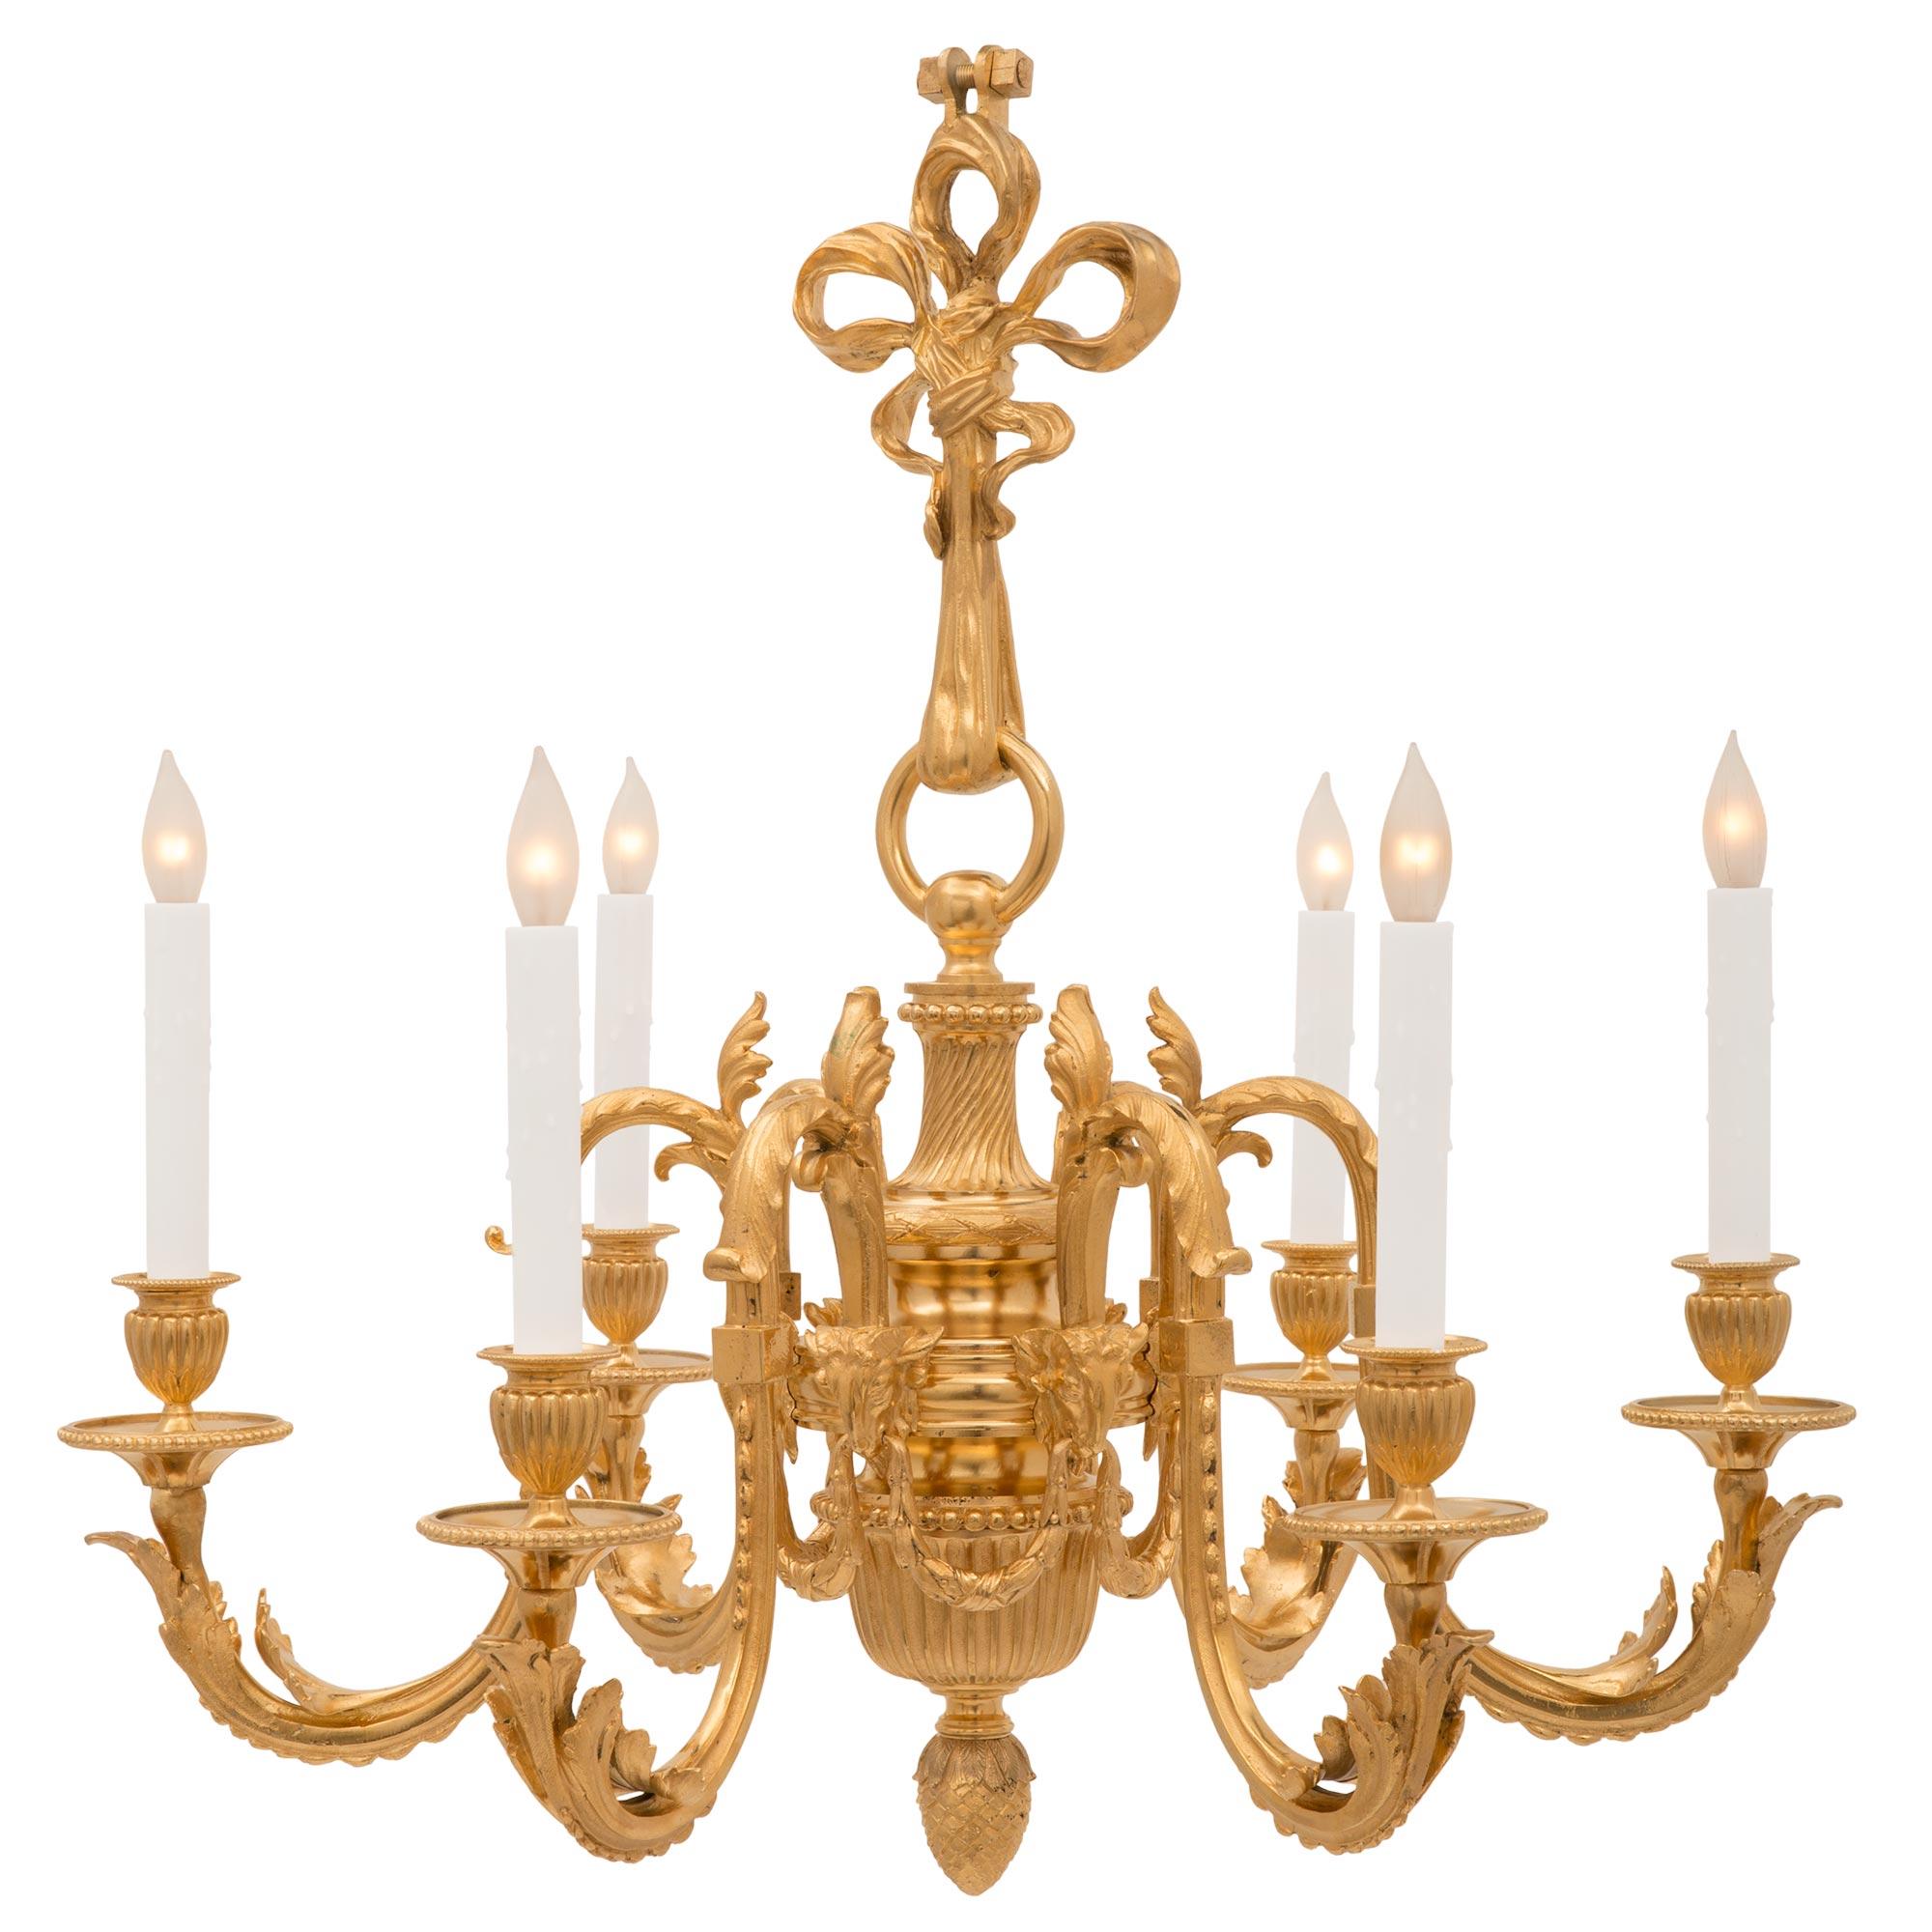 A charming French 19th century Louis XV st. ormolu chandelier. The six arm chandelier is centered by a beautiful finely detailed acorn finial below the reeded body. Each of the elegantly scrolled arms branches out from impressive rams heads